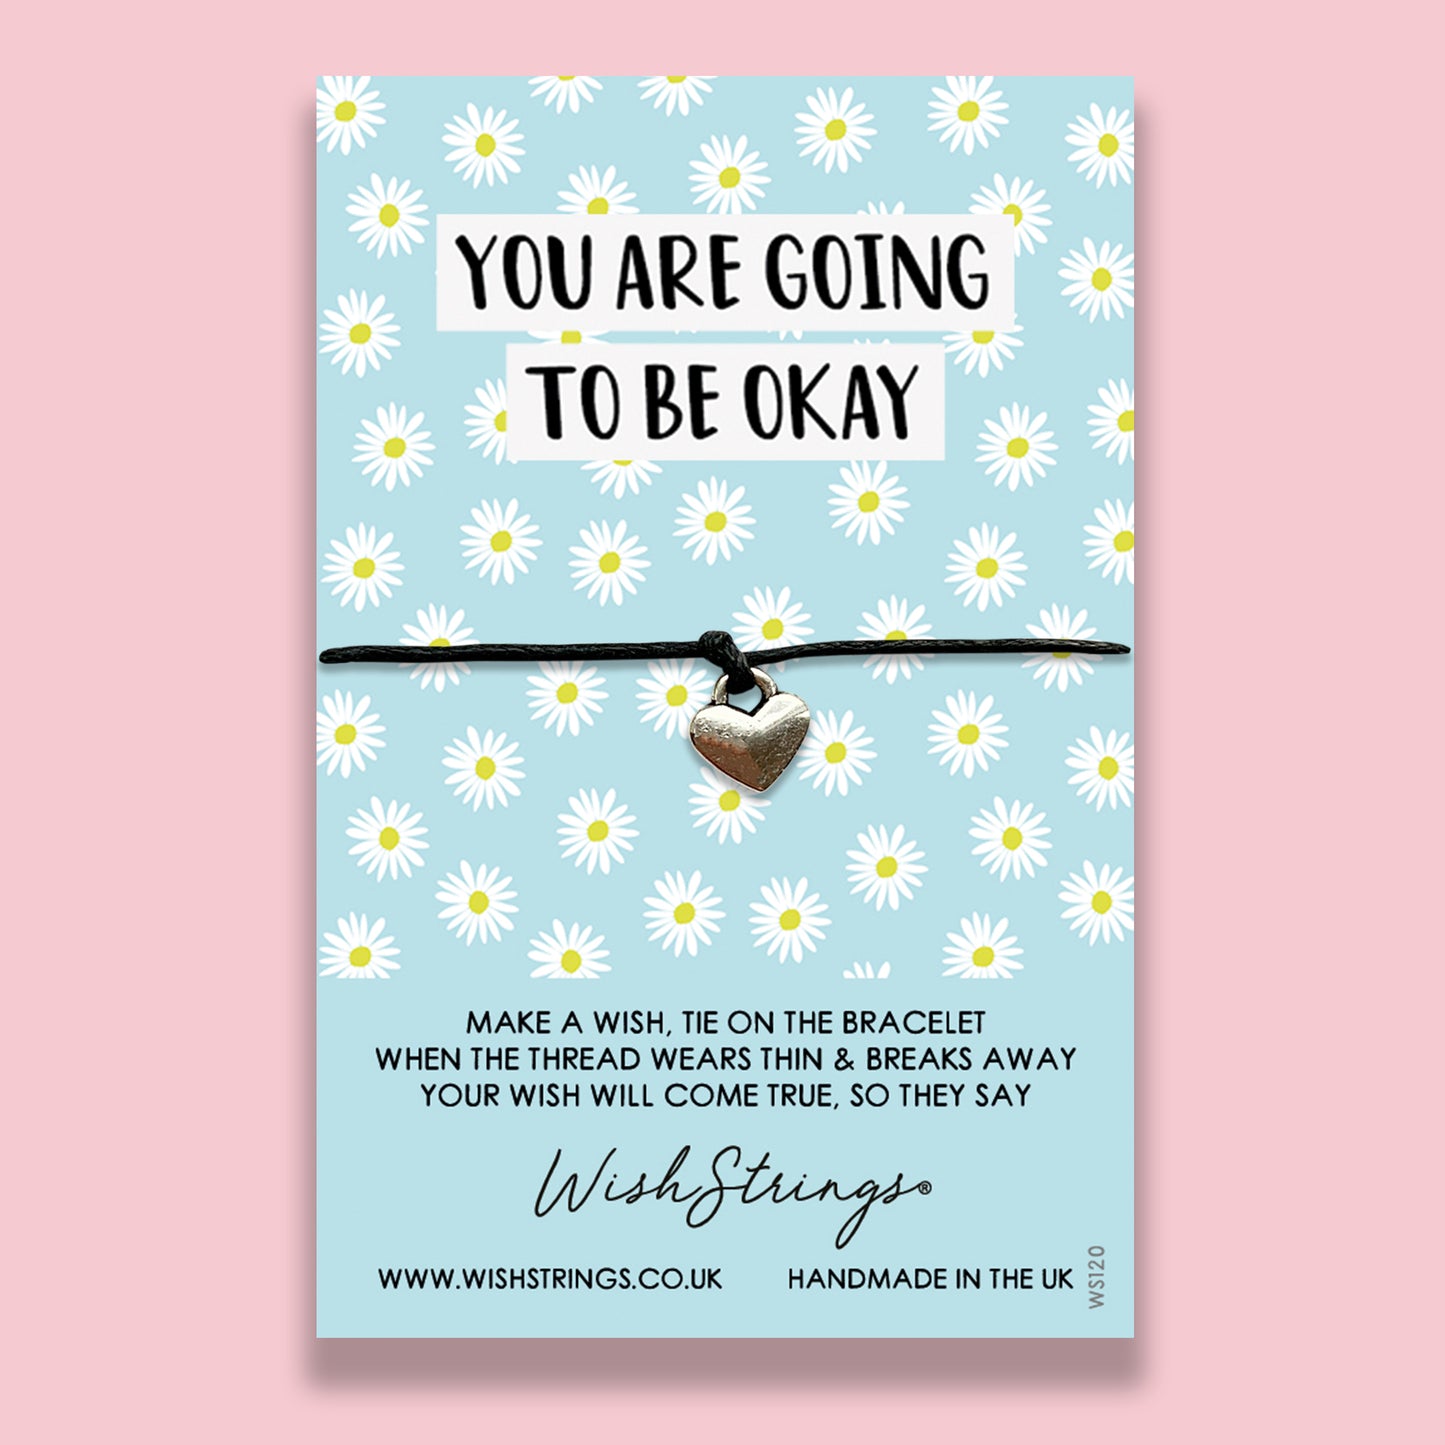 Be Okay - WishStrings Wish Bracelet- Friendship Bracelet with Quote Card | Positive Affirmation Quote